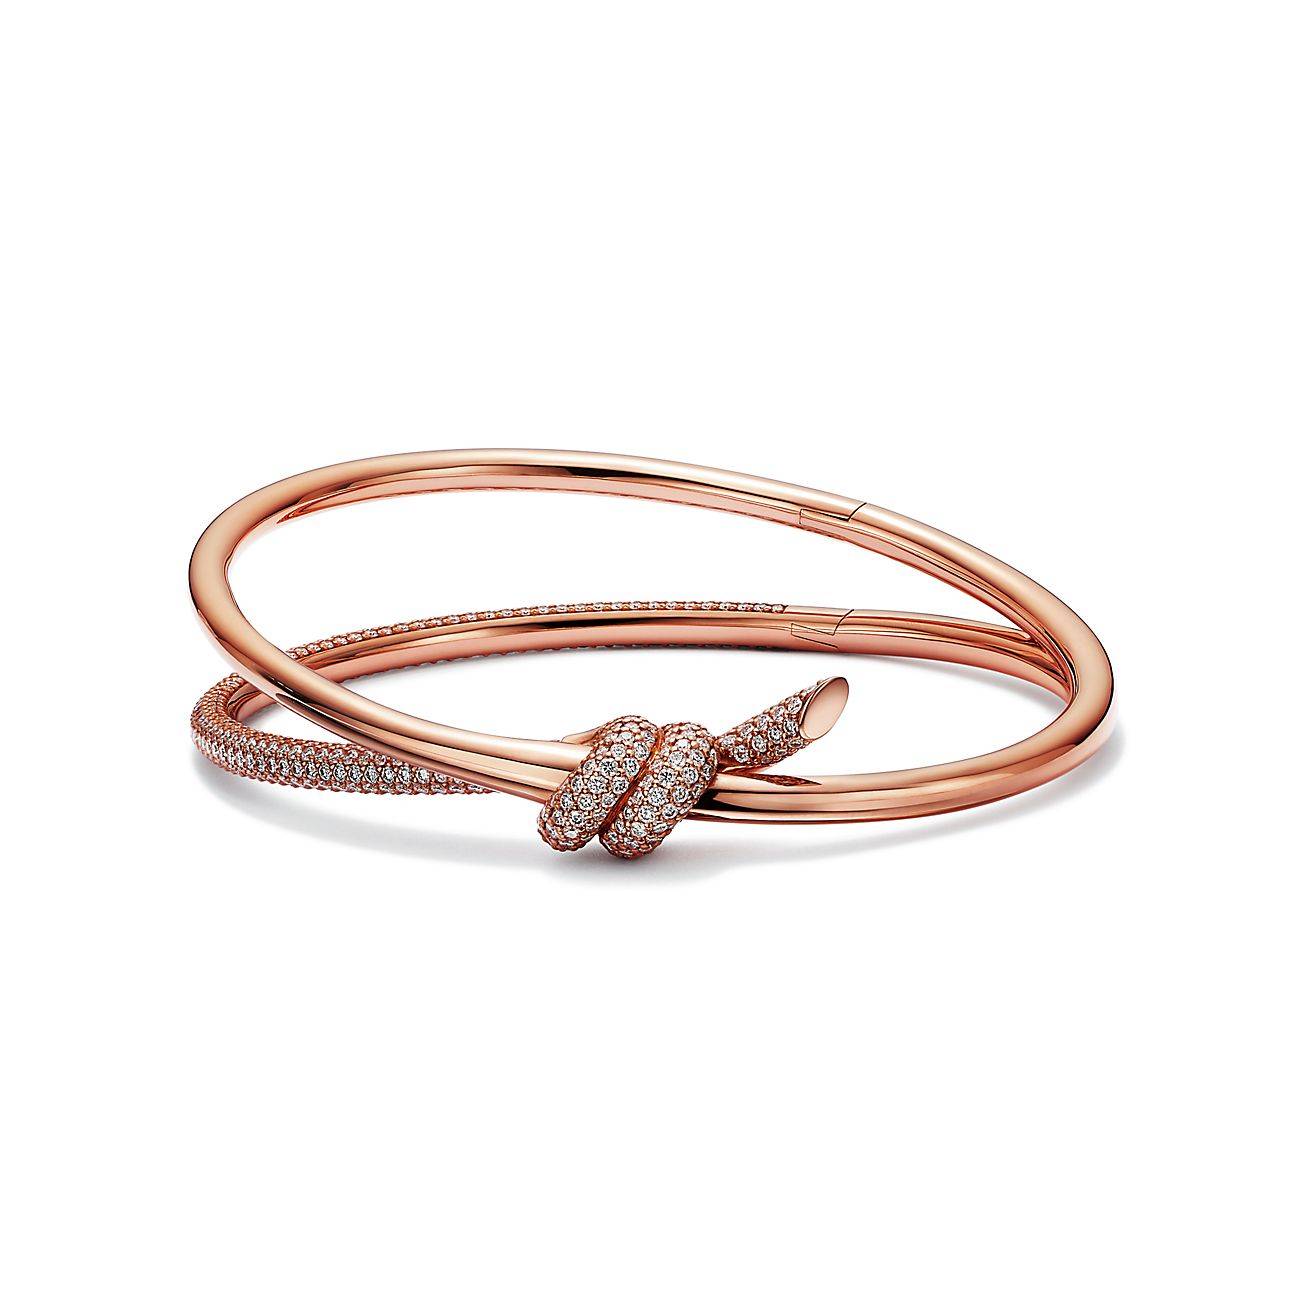 TIFFANY KNOT DOUBLE ROW HINGED BANGLE IN ROSE GOLD WITH DIAMONDS